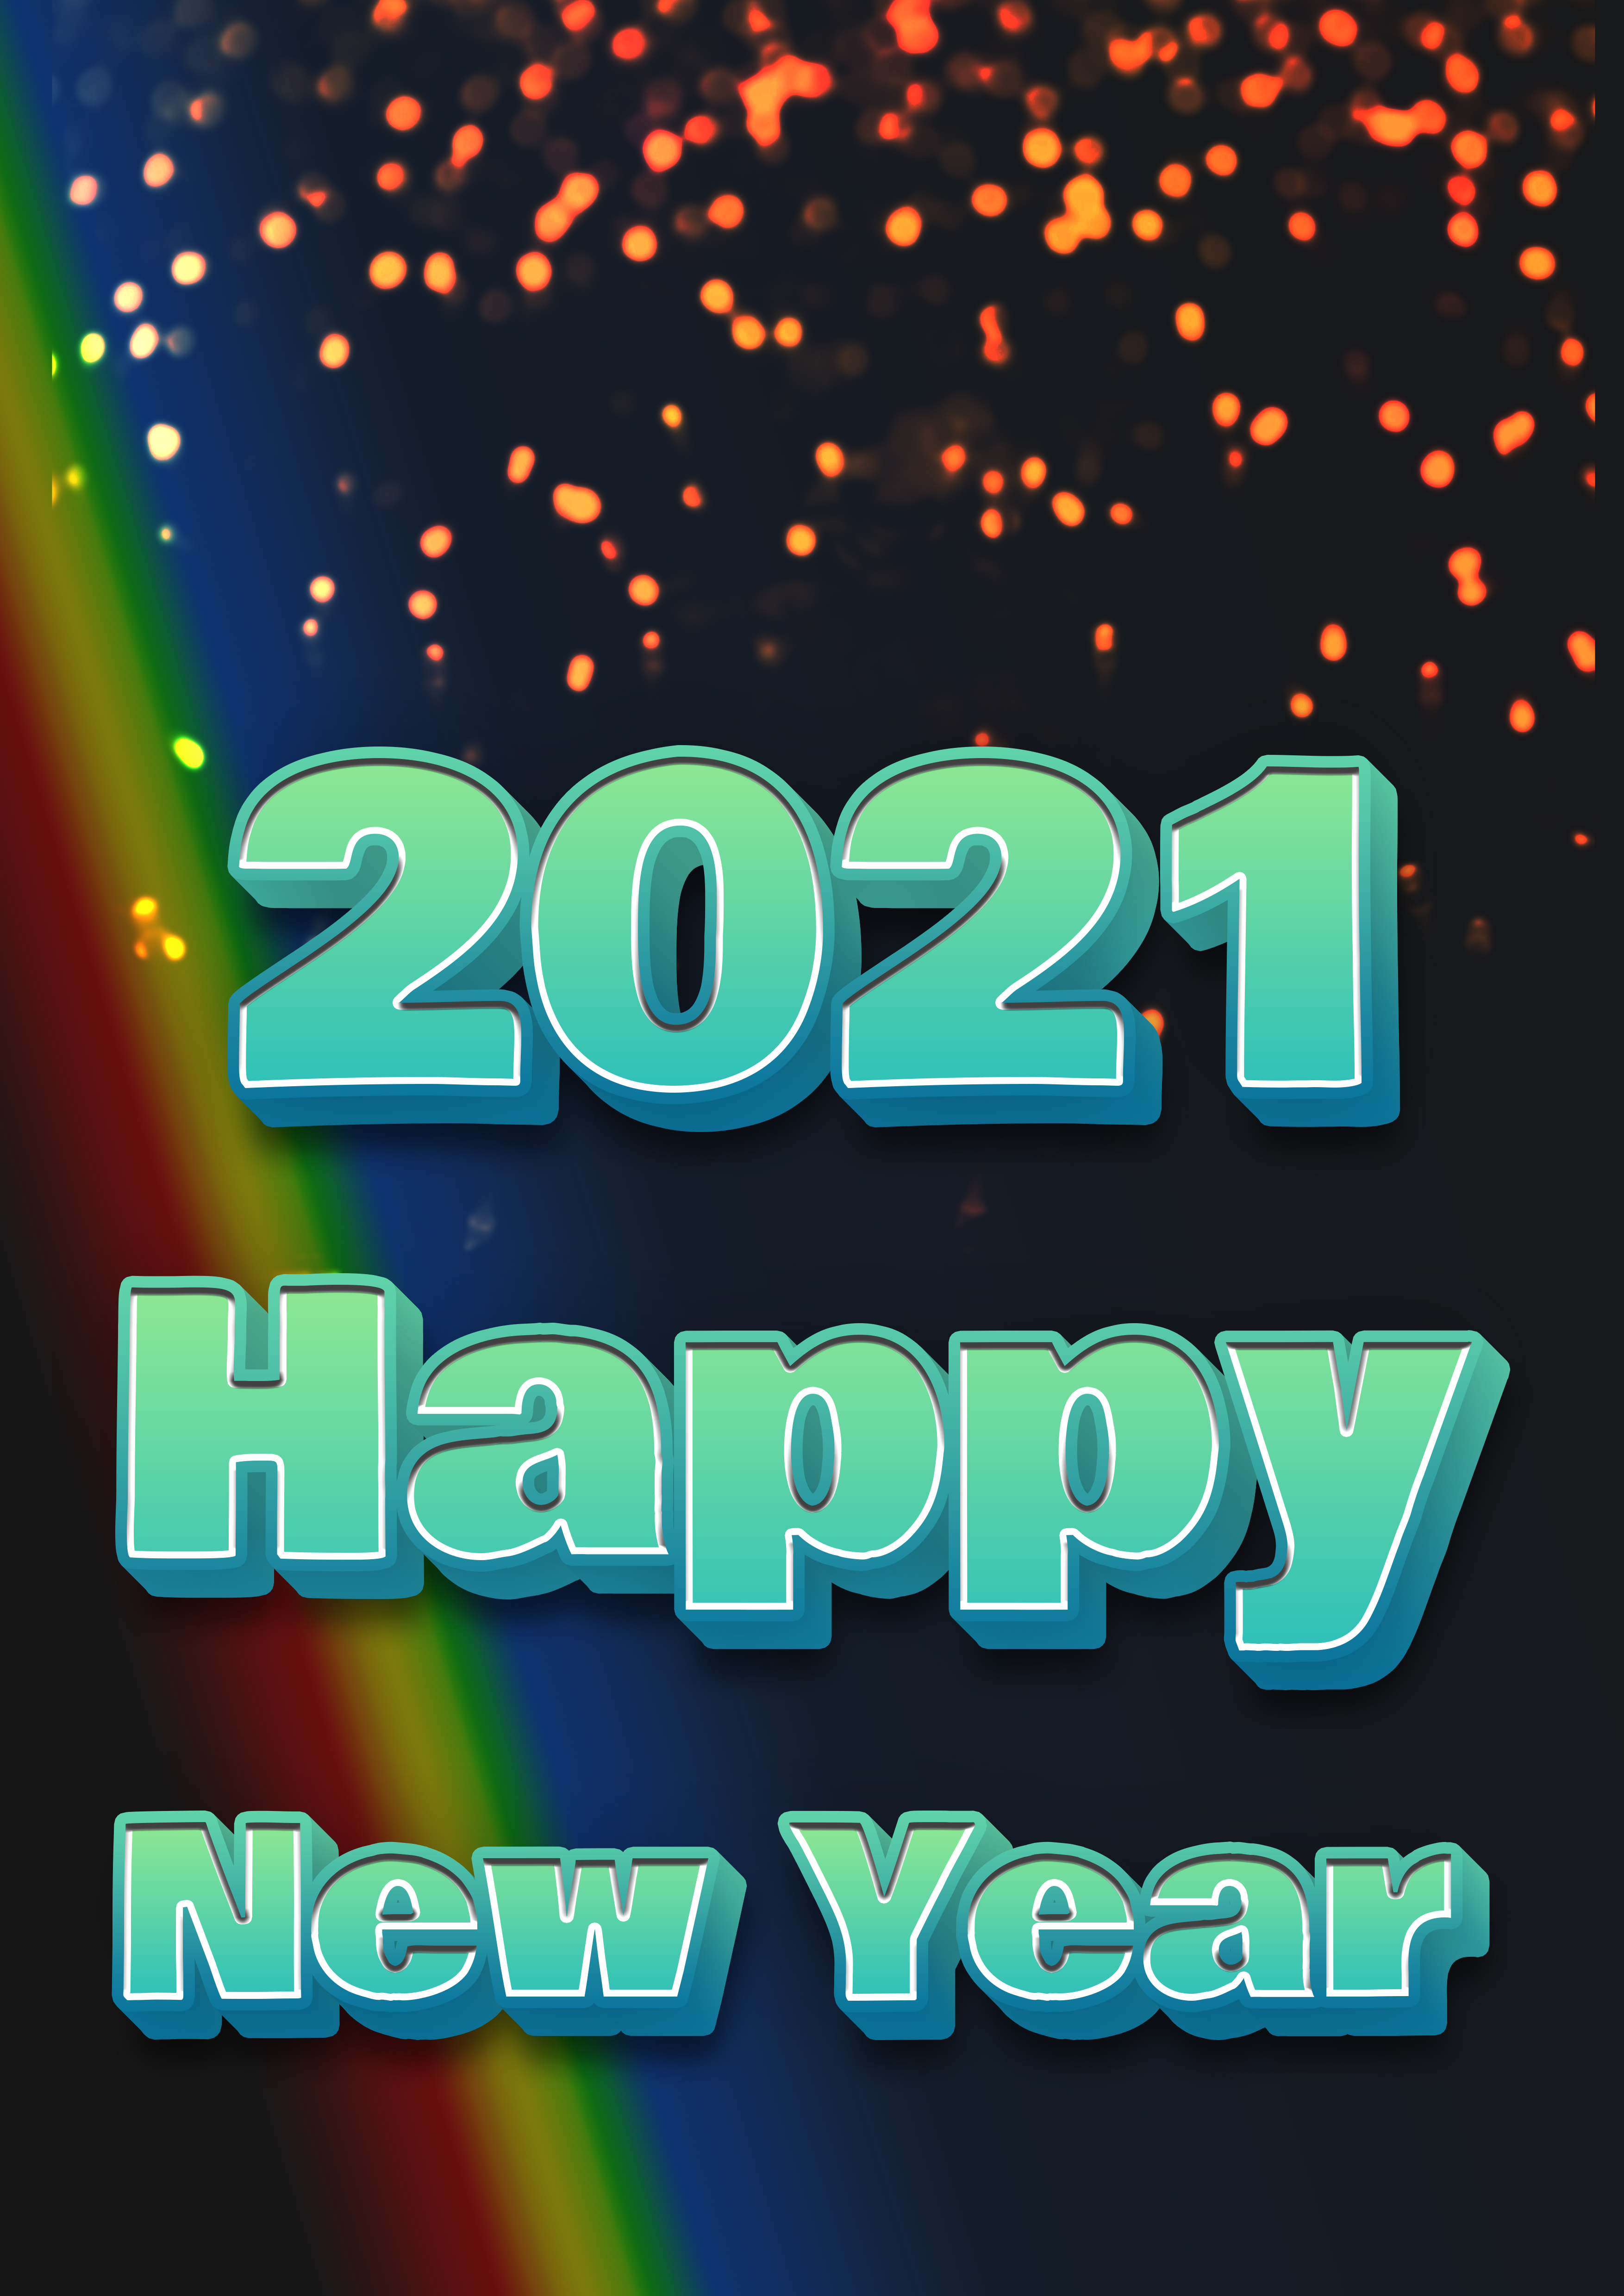 Free Happy New Year 2021 Wallpaper Download